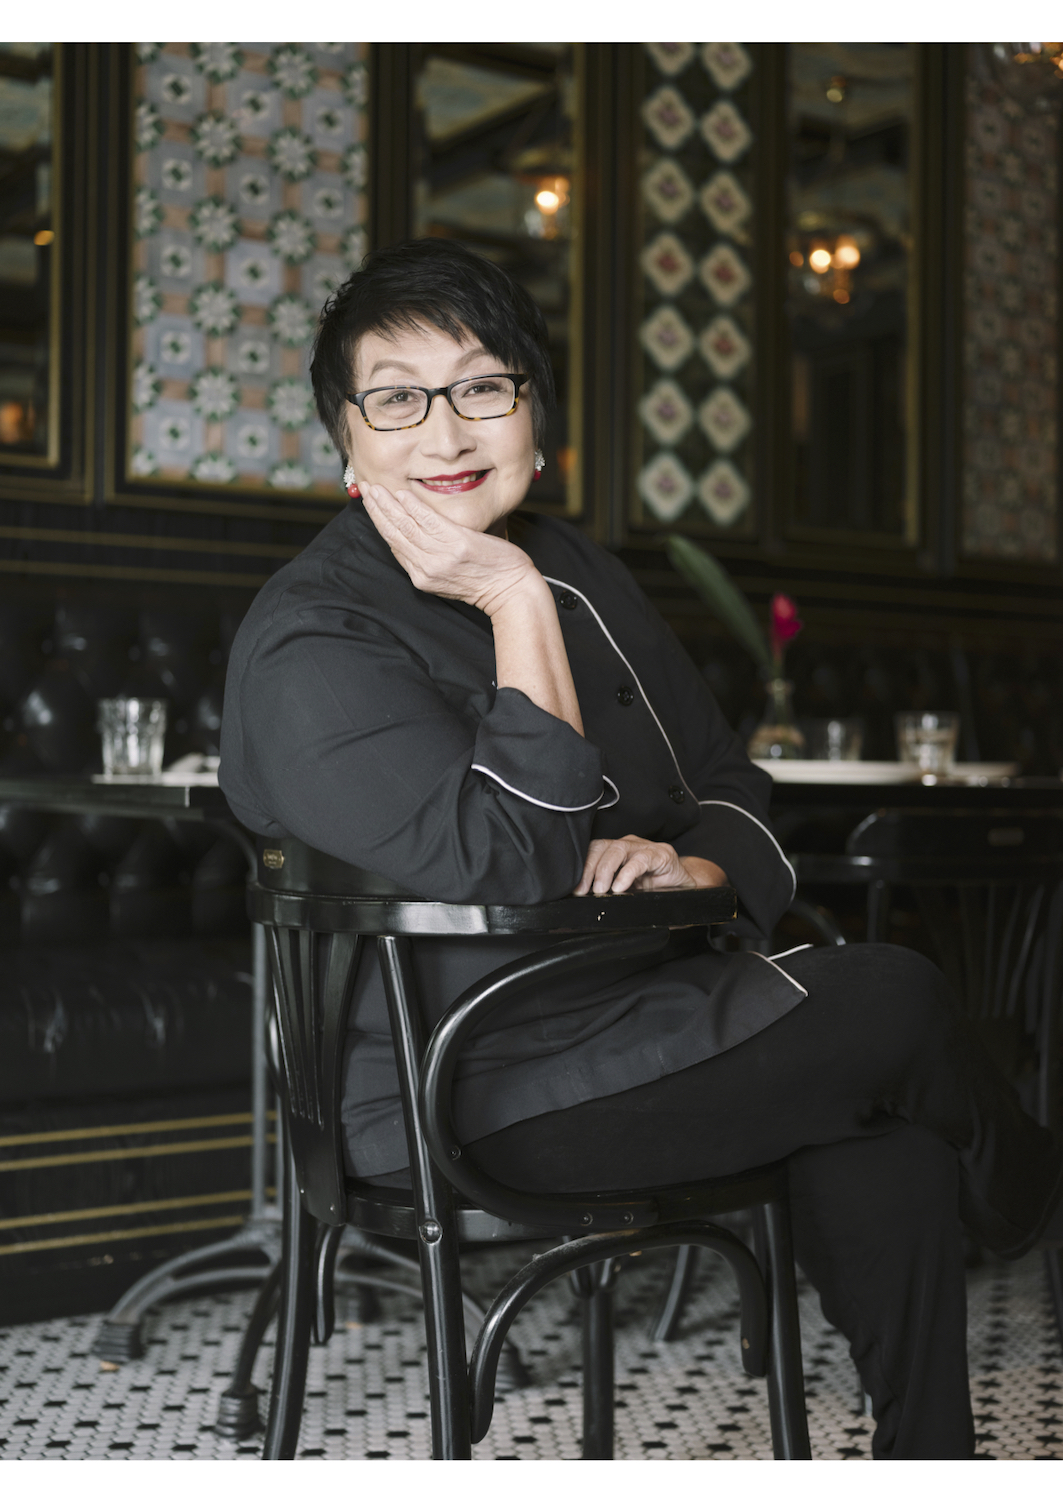 Violet Oon is an icon in the Singapore food industry